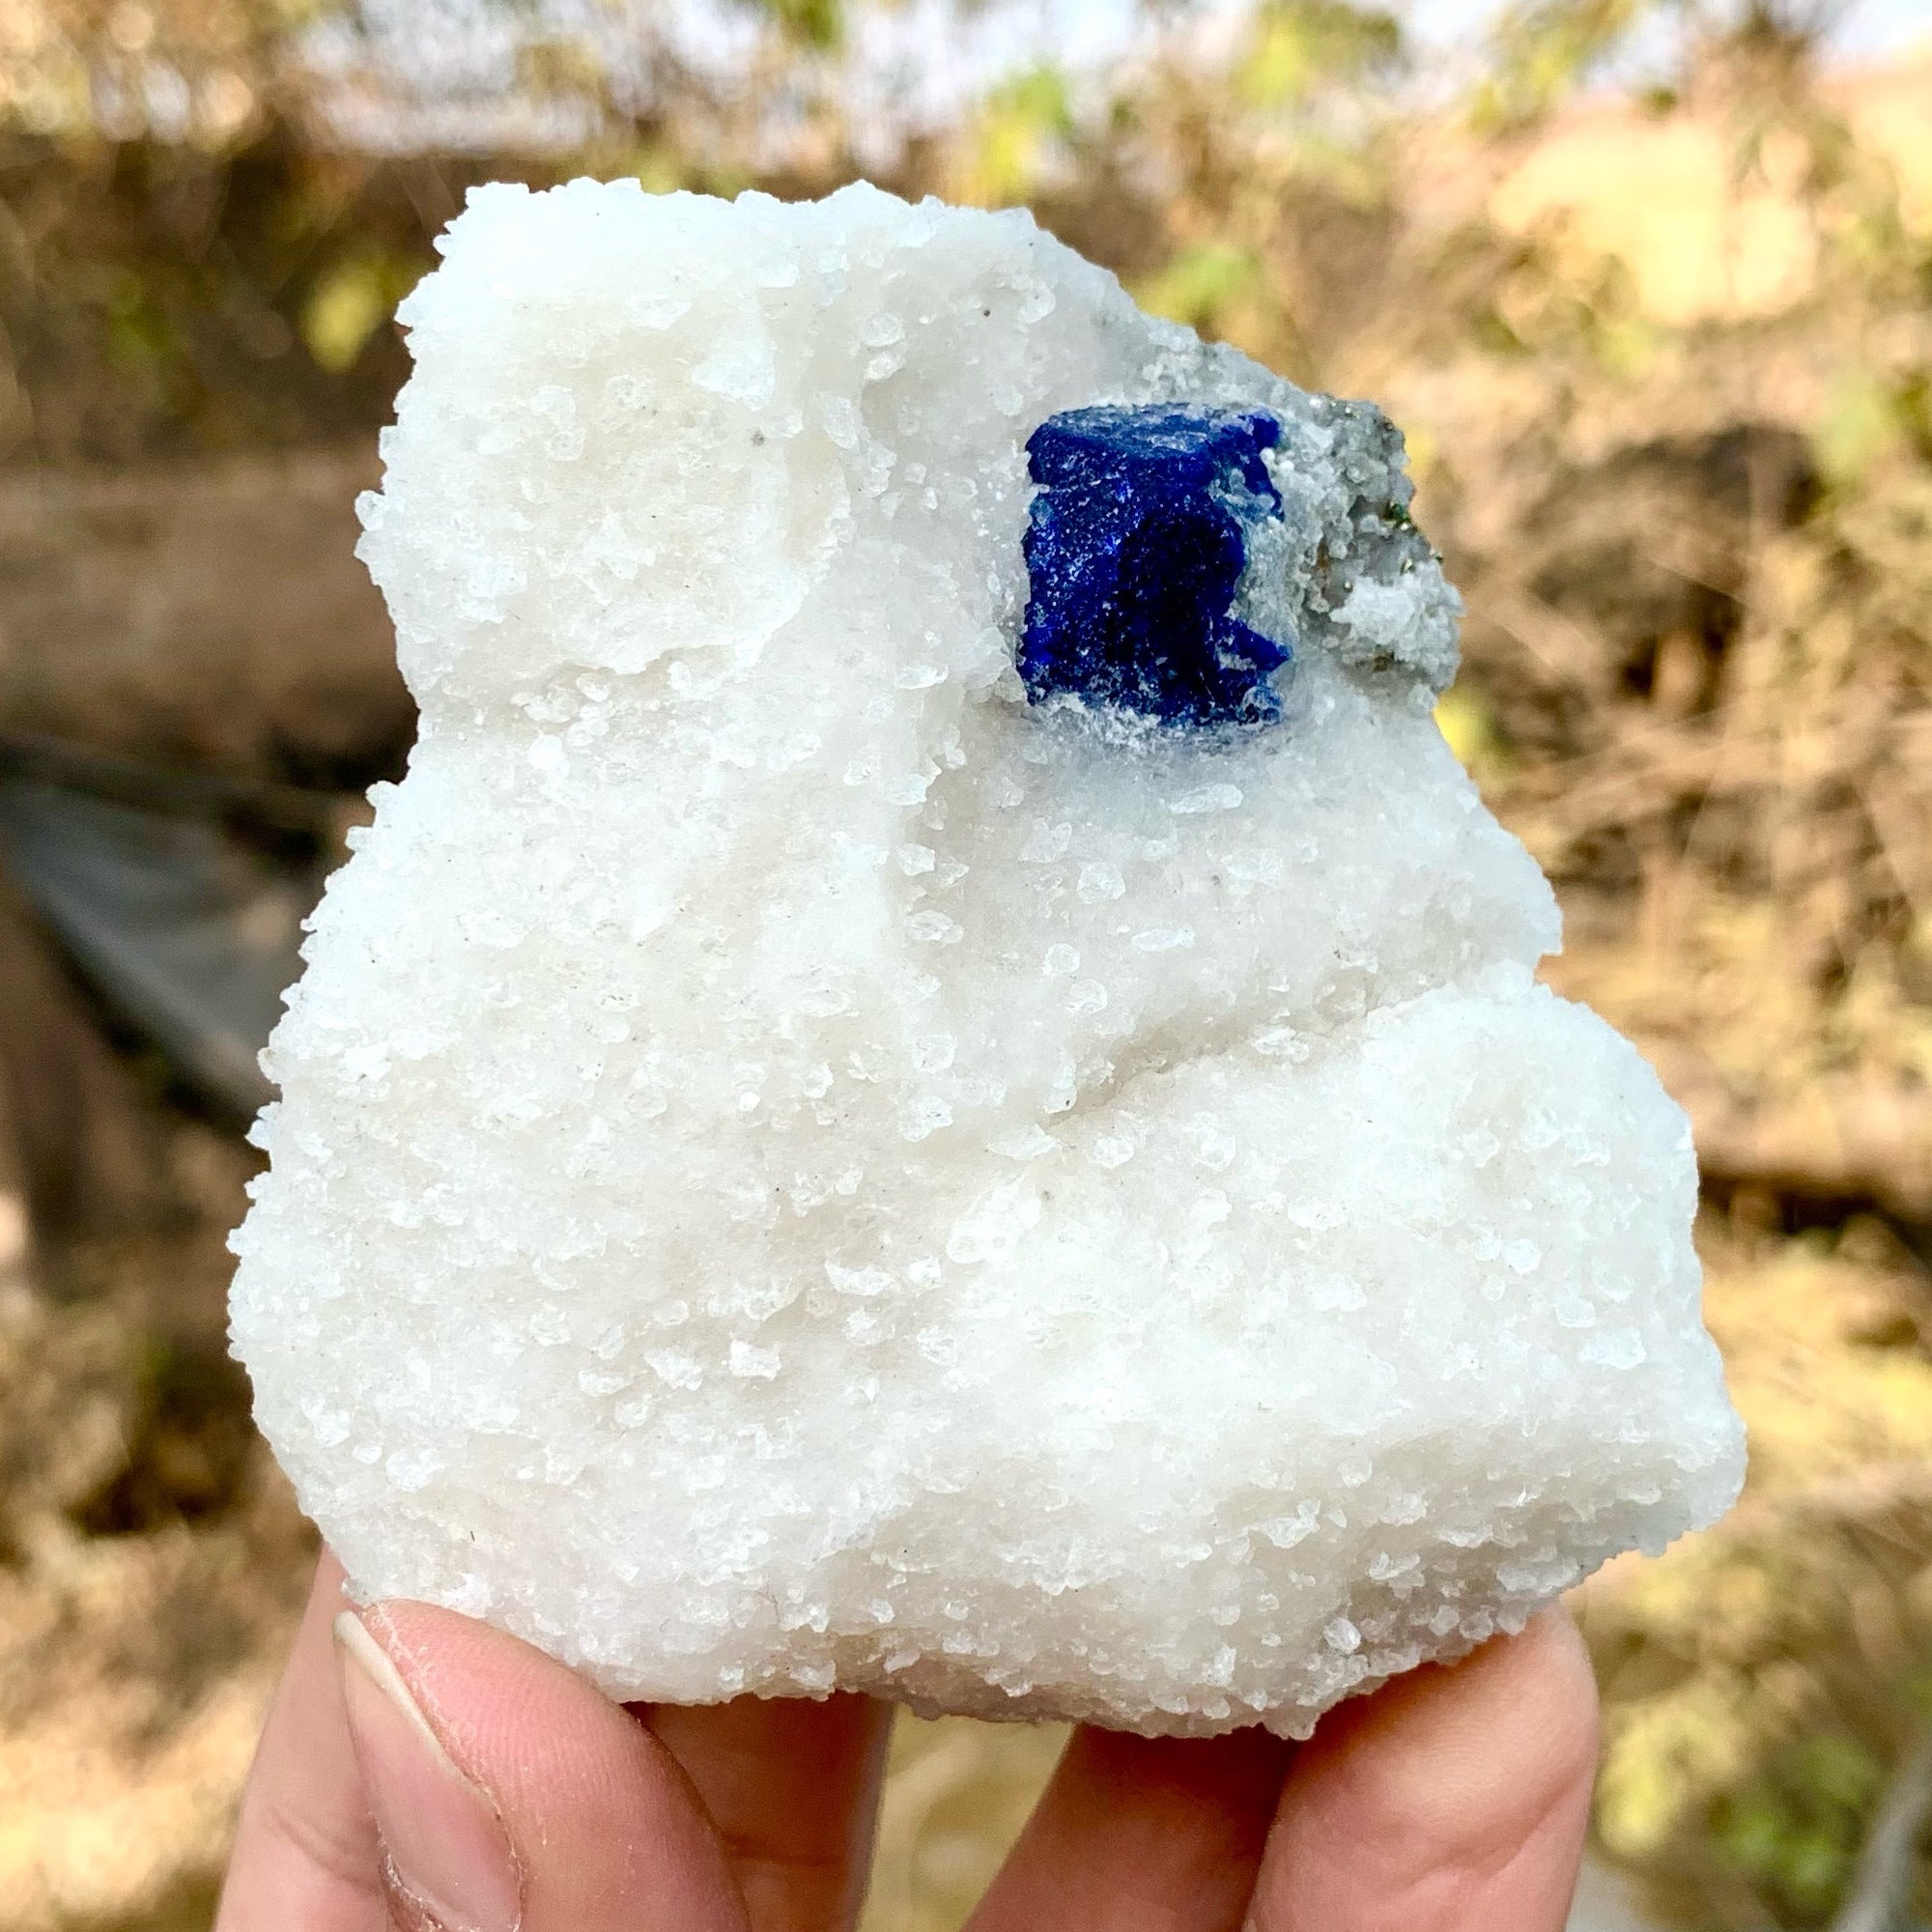 Azure Blue Lazurite Crystal Nicely Positioned On Creamy White Calcite Matrix